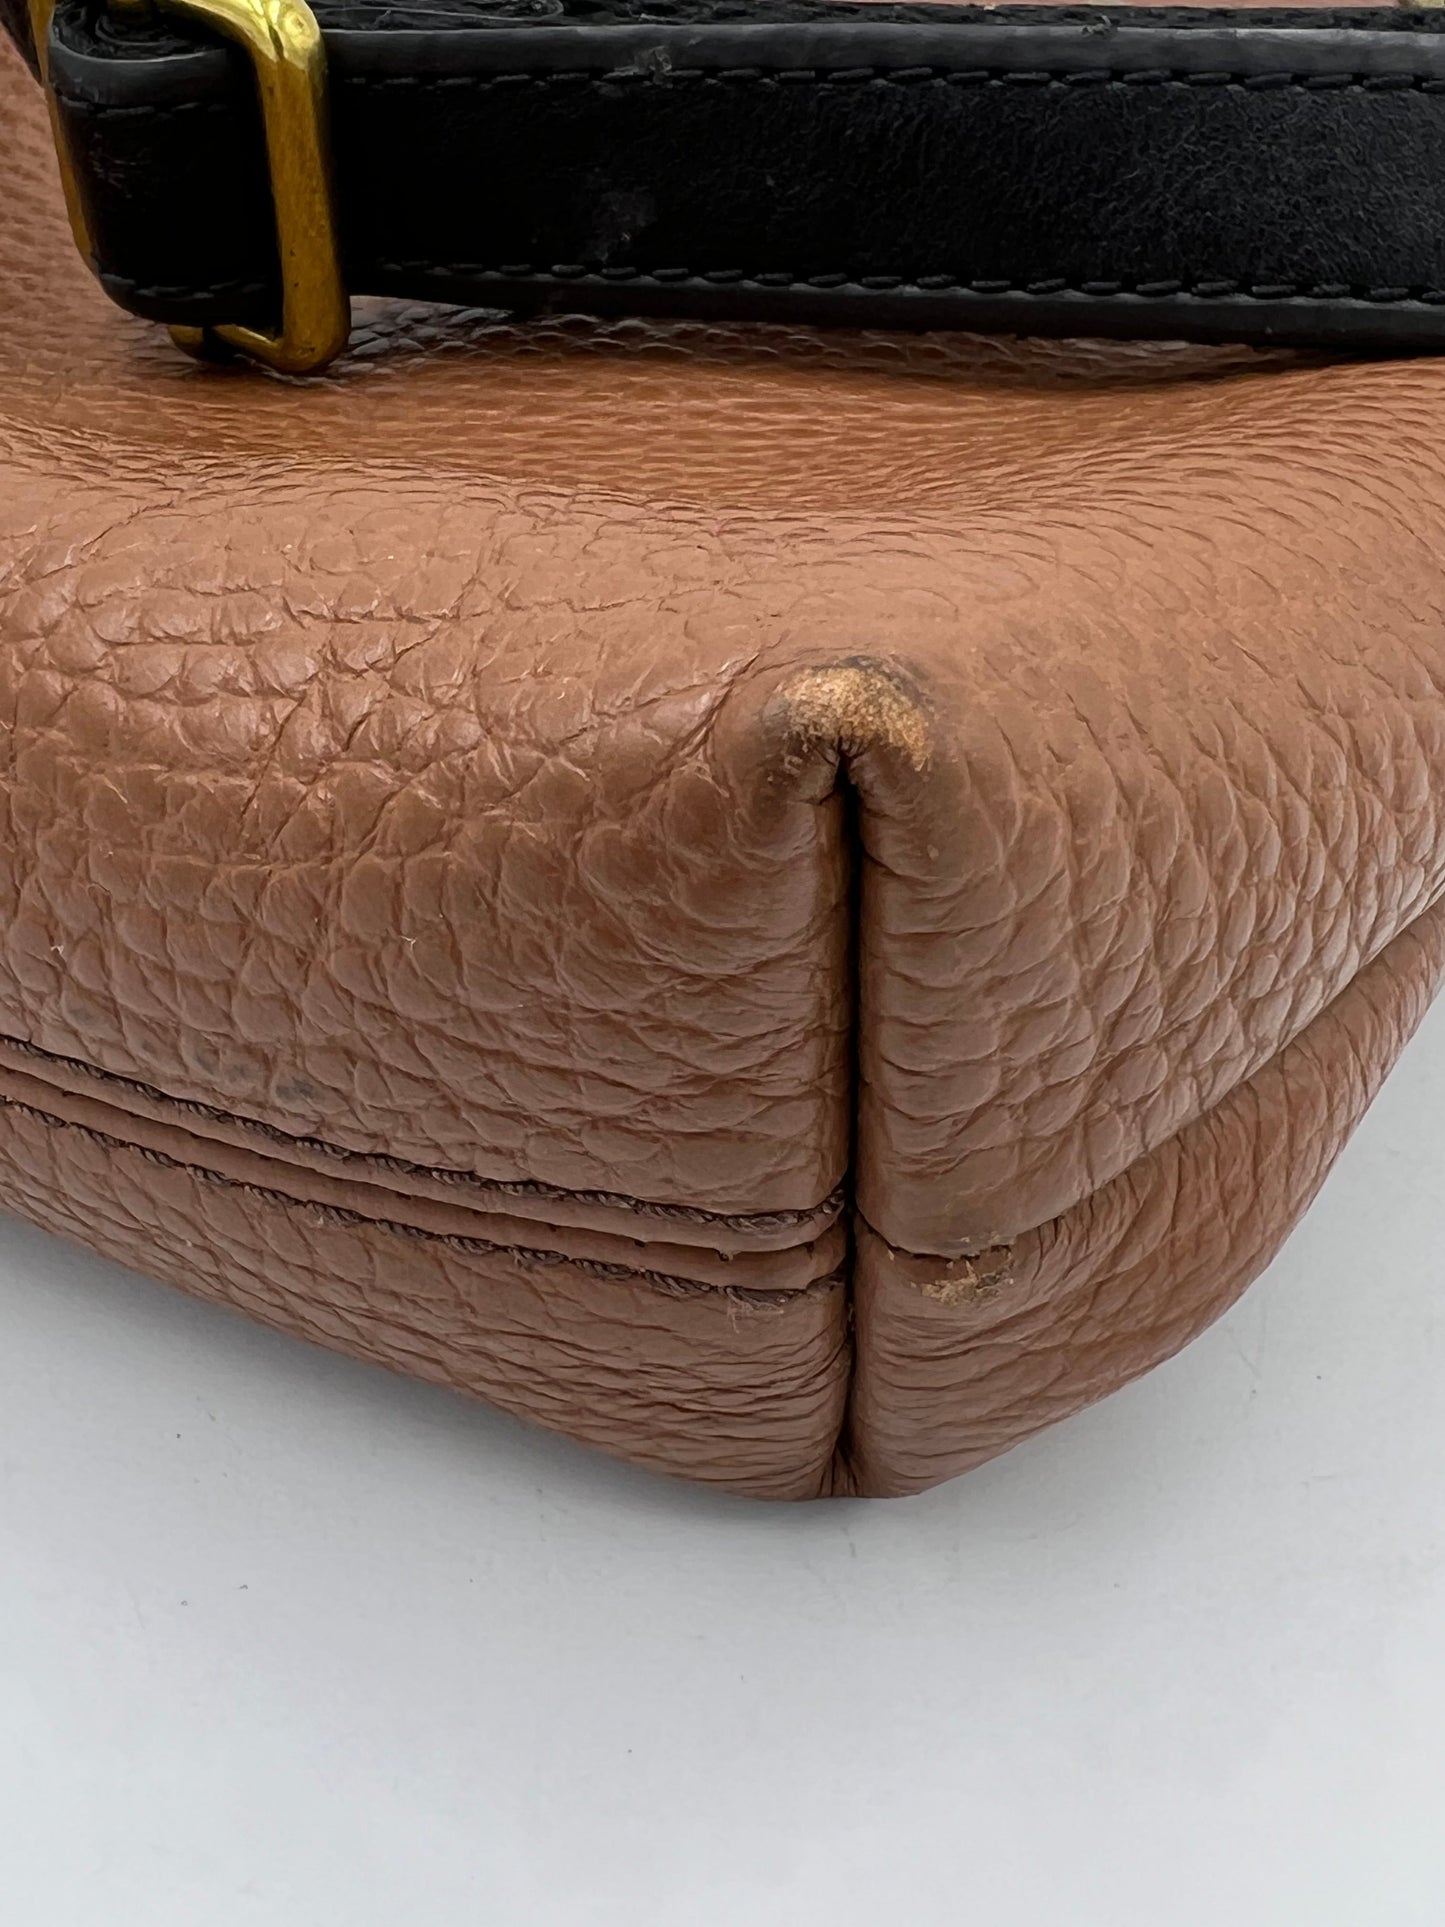 Crossbody Designer By Fossil  Size: Small